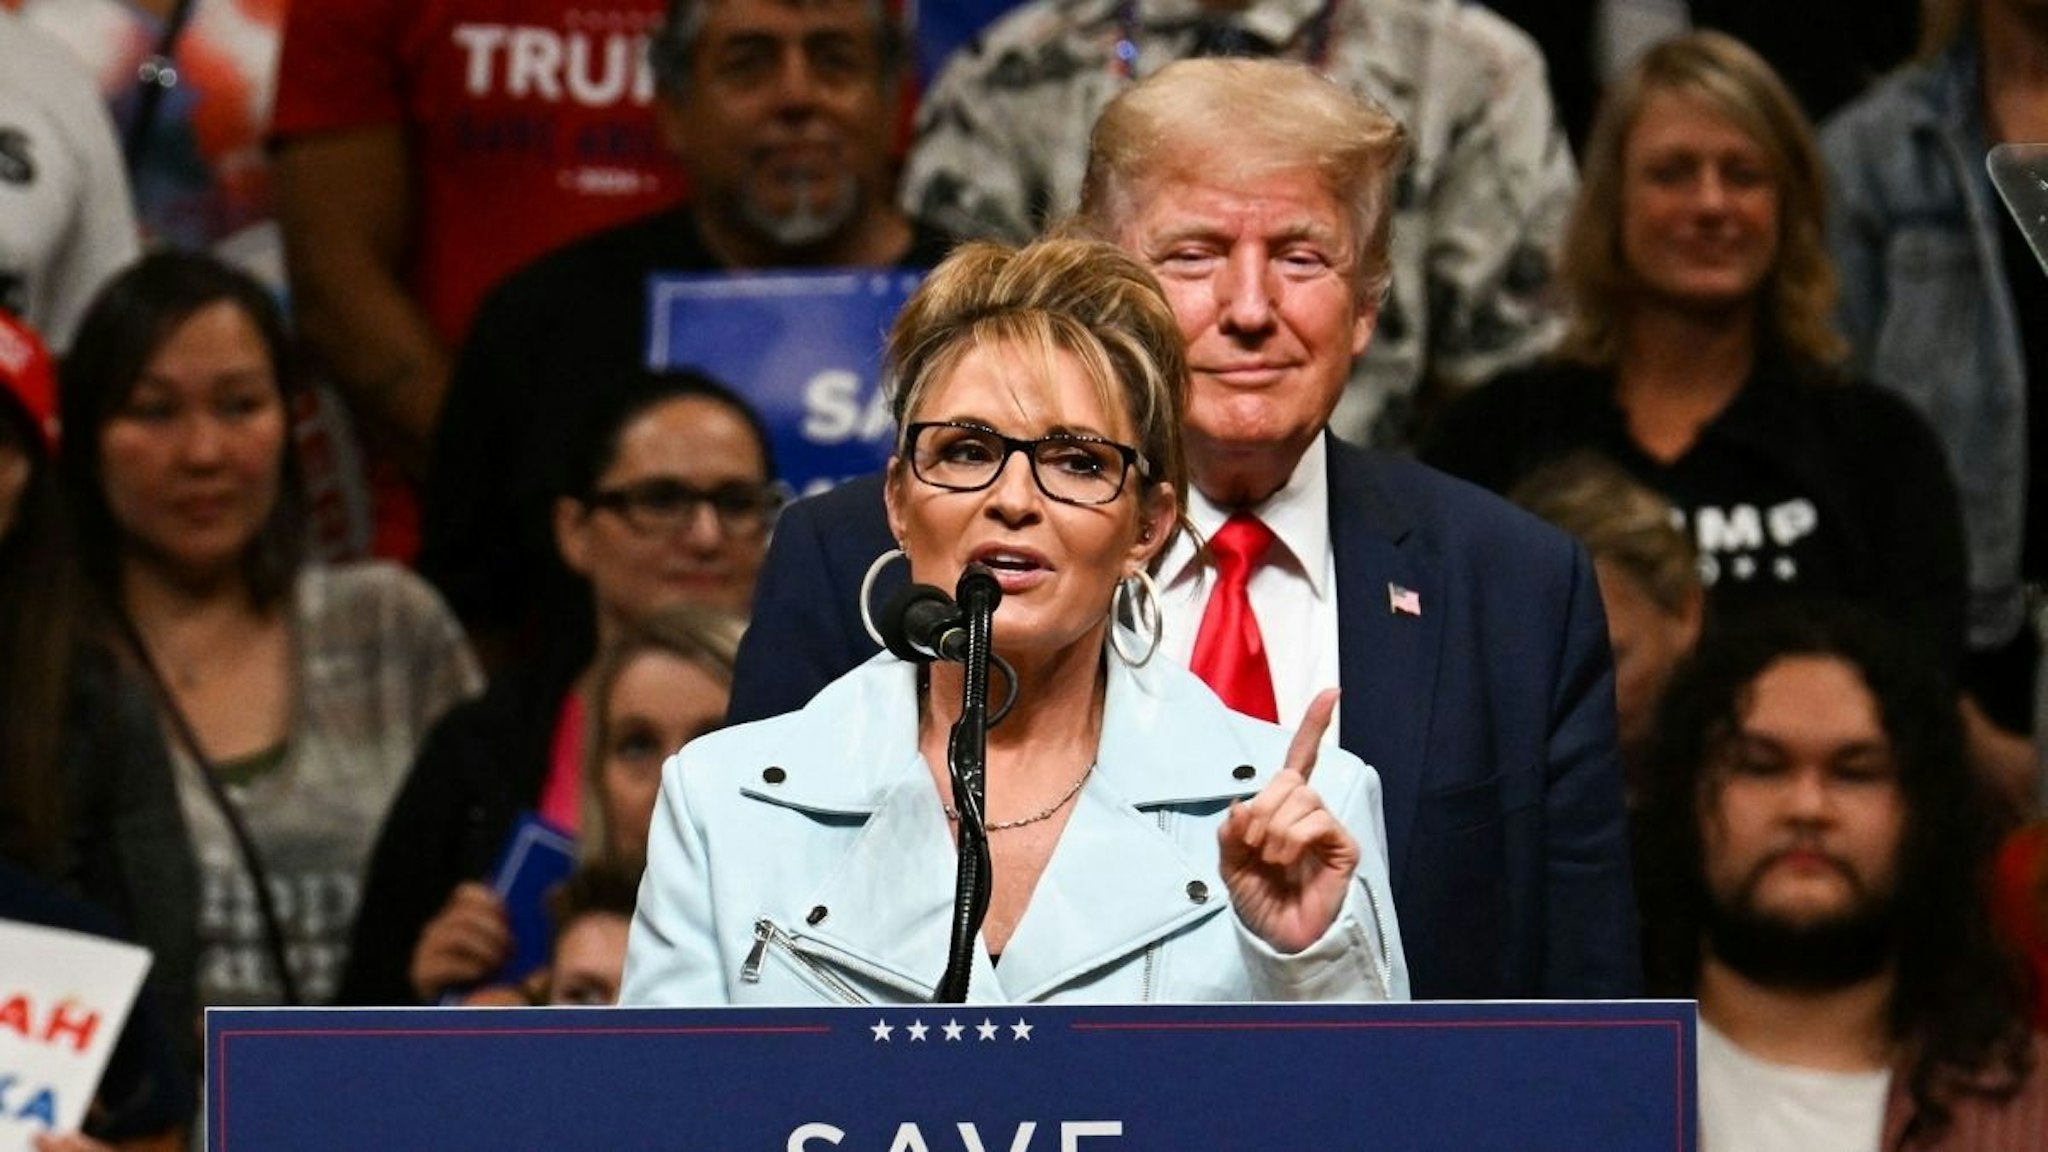 House of Representatives candidate, Sarah Palin (L) speaks alongside former US President Donald Trump during a "Save America" rally in Anchorage, Alaska on July 9, 2022.